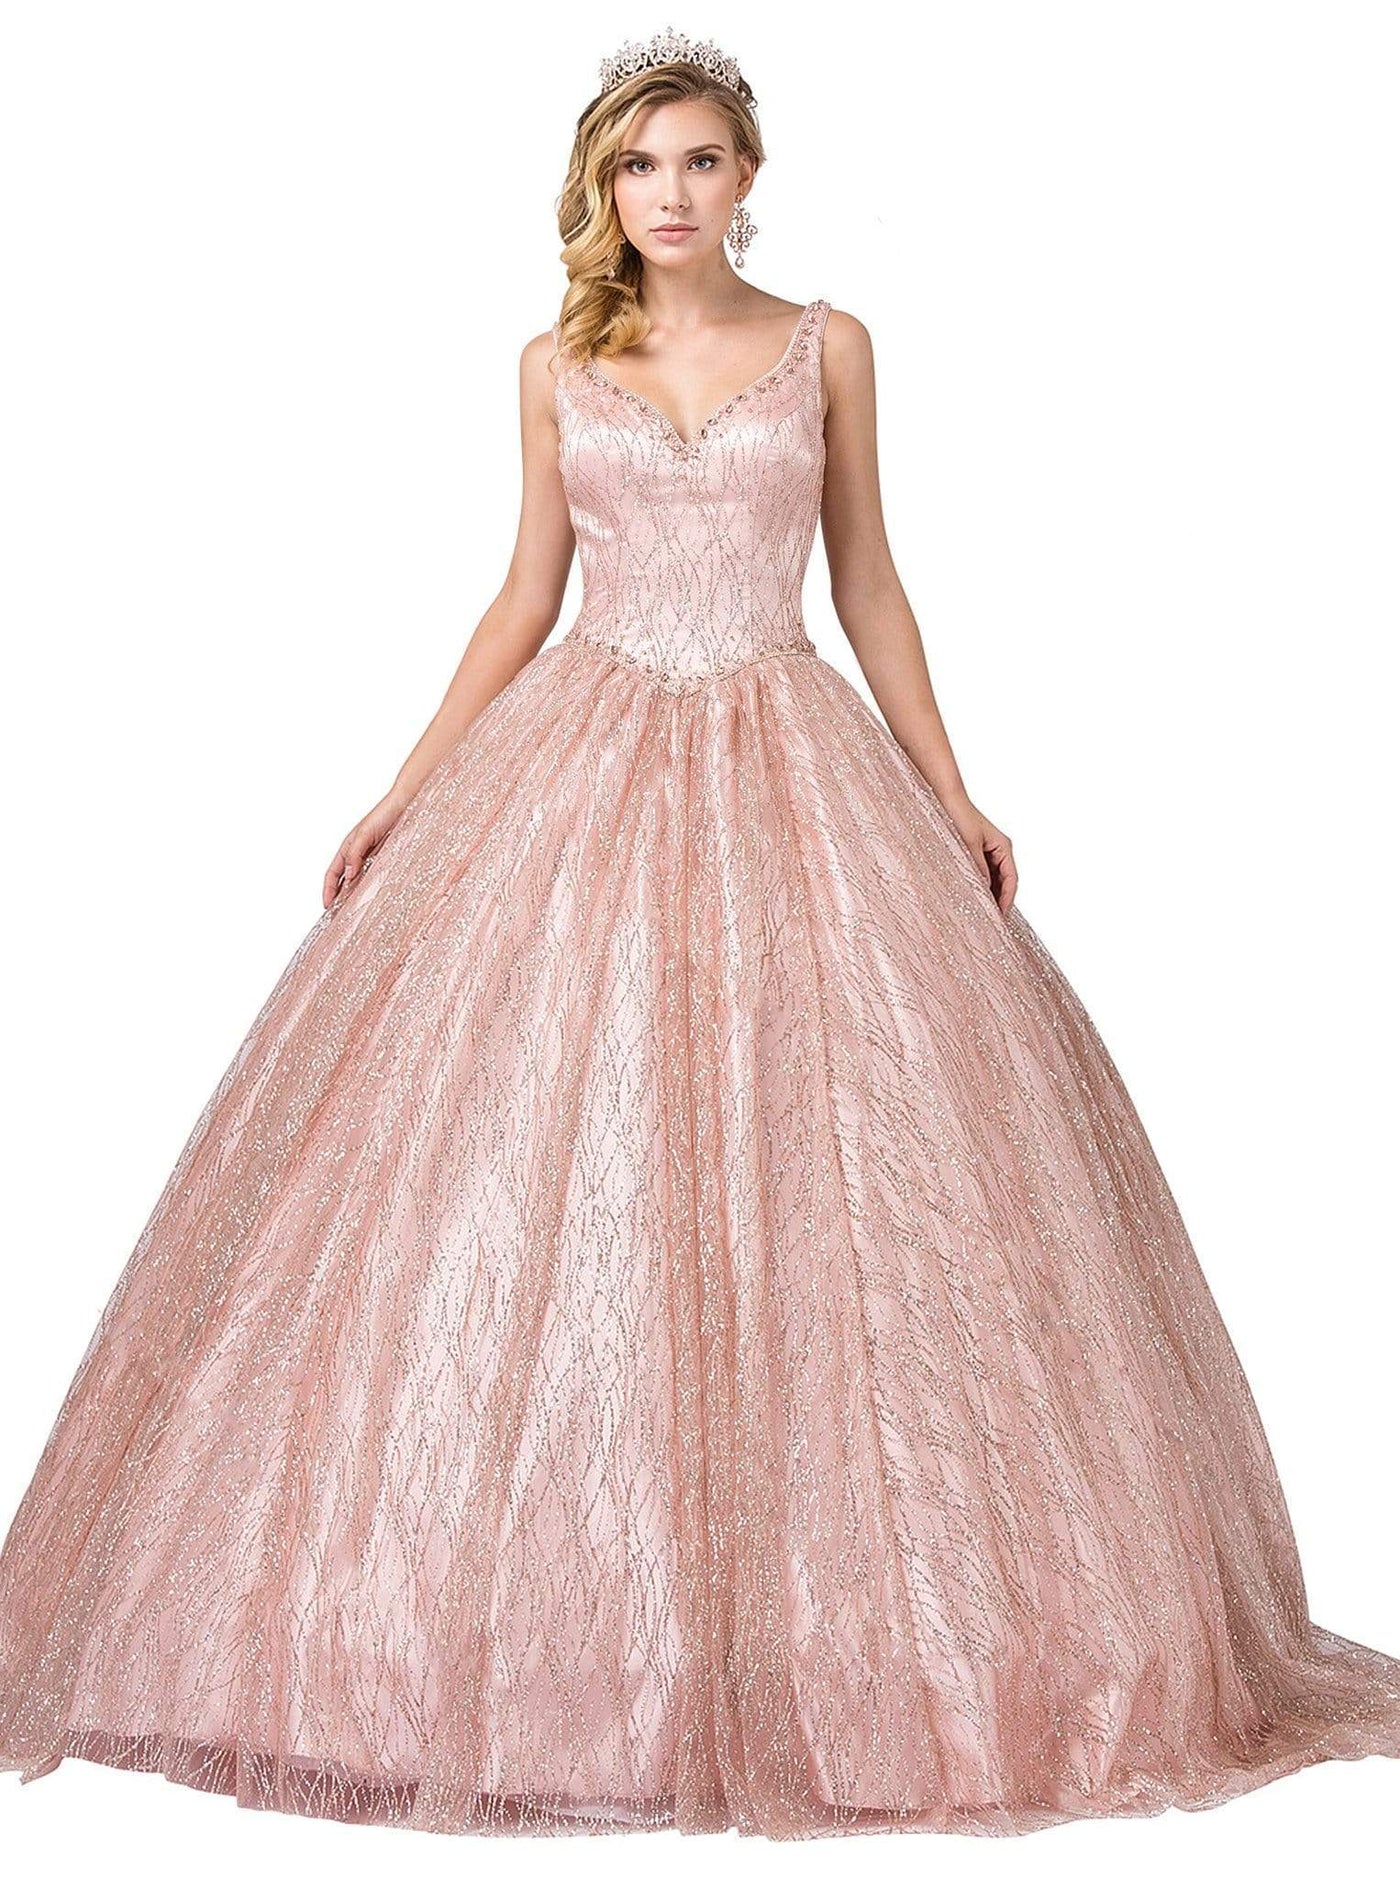 Dancing Queen - 1400 Ornate Plunging V-neck Ballgown Special Occasion Dress XS / Rose Gold